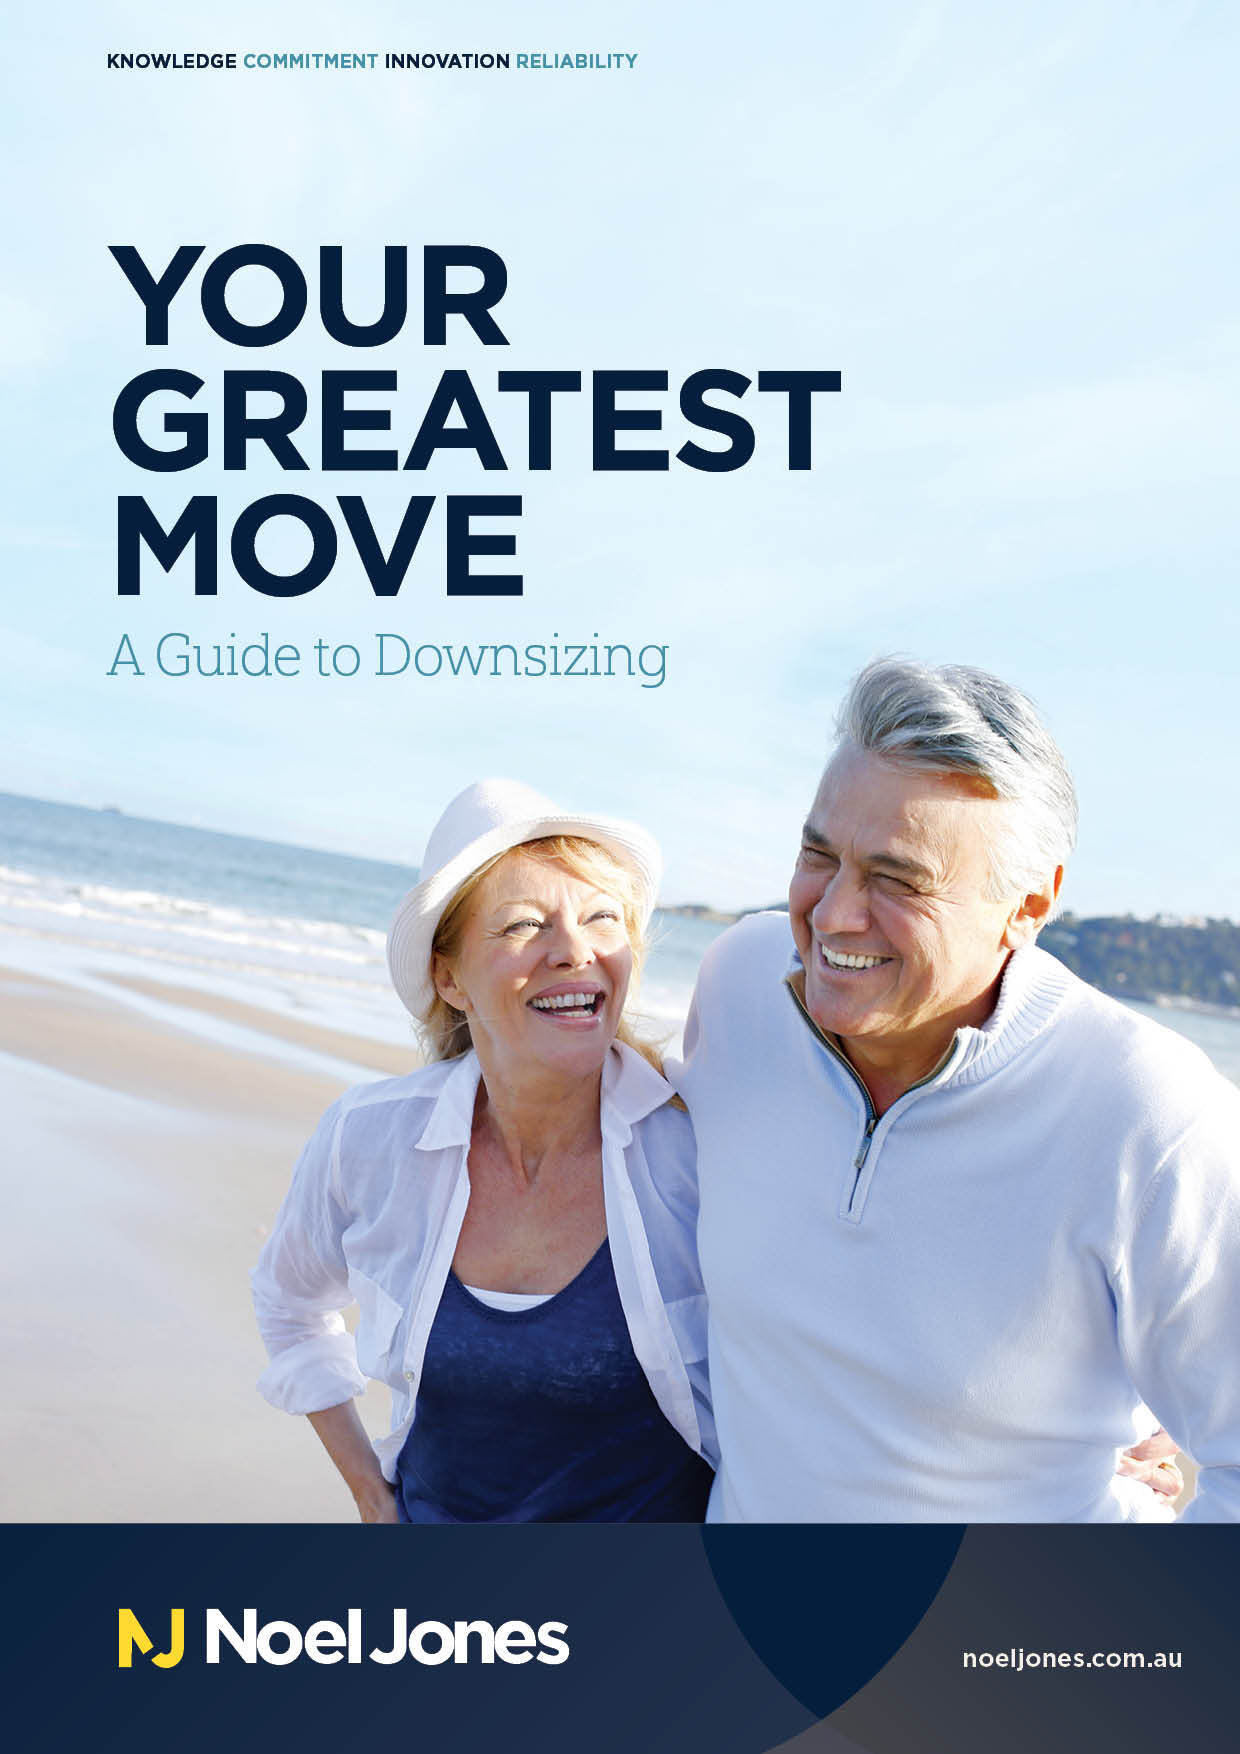 Download your copy of Your Greatest Move - A Guide to Downsizing